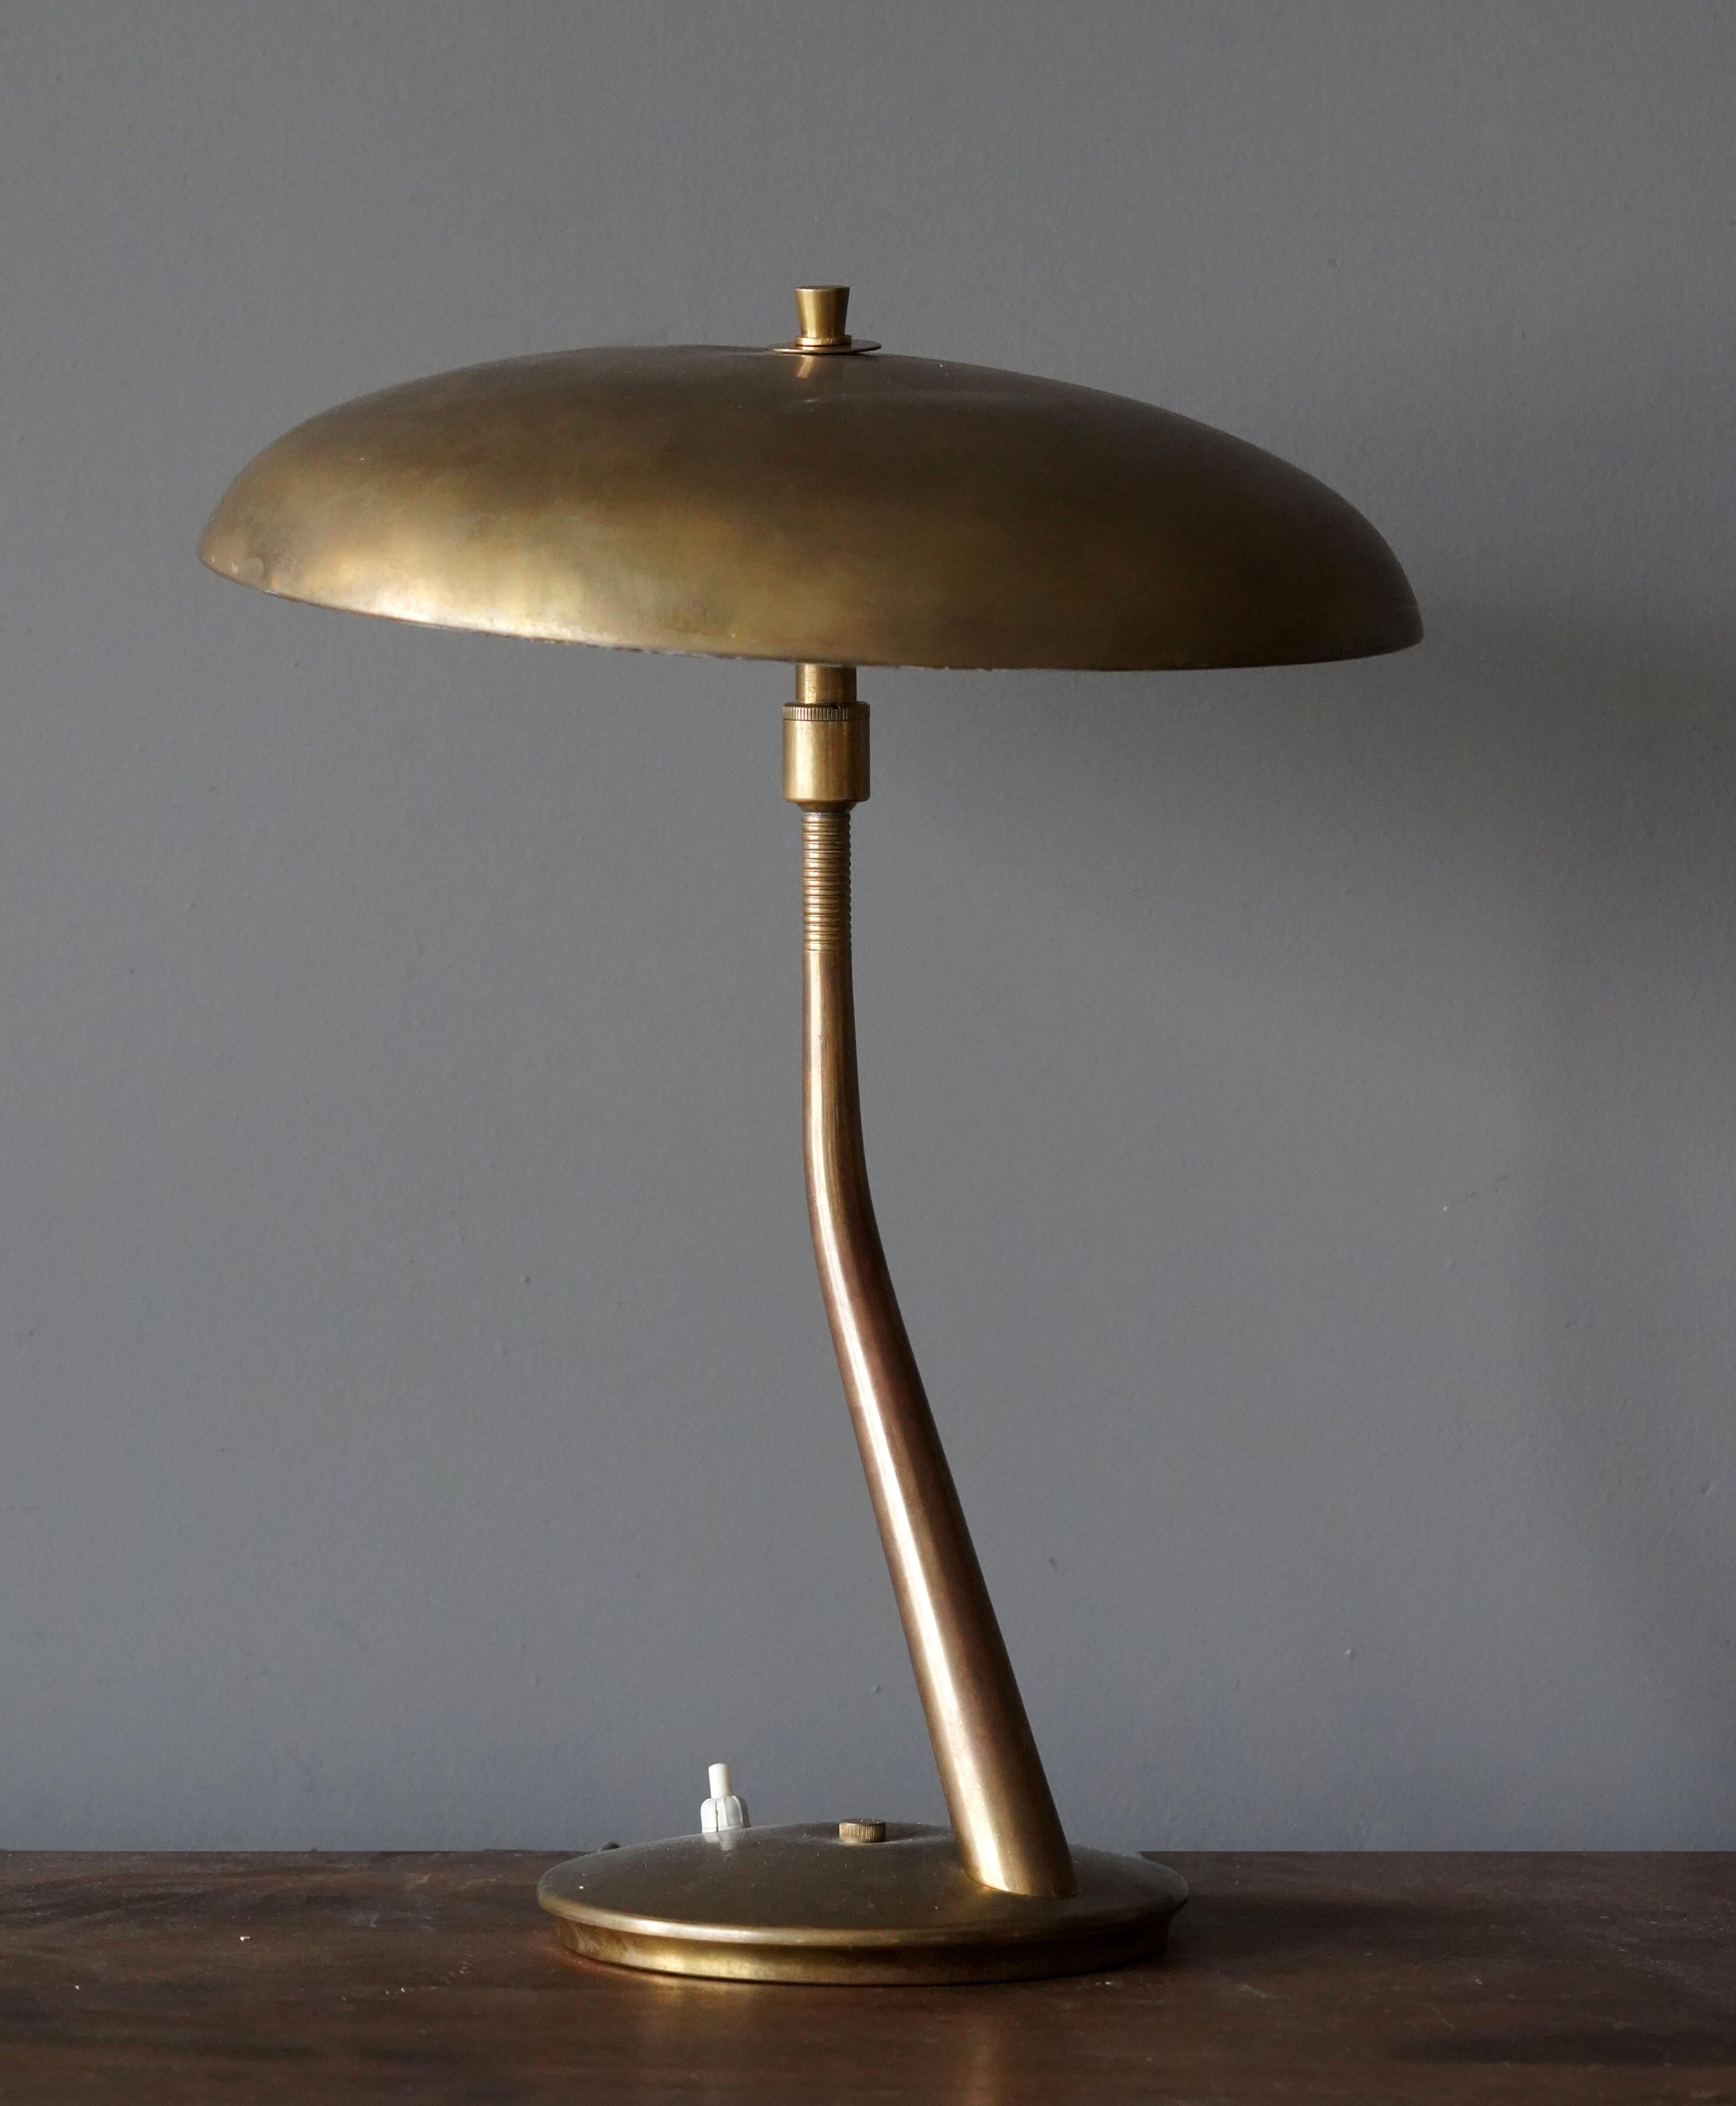 An adjustable modernist table lamp / desk light produced and designed by Lumen Milano, Italy, 1950s. In brass.

Other designers of the era include Max Ingrand, Gino Sarfatti, Angelo Lelii, and Achille Castiglioni.